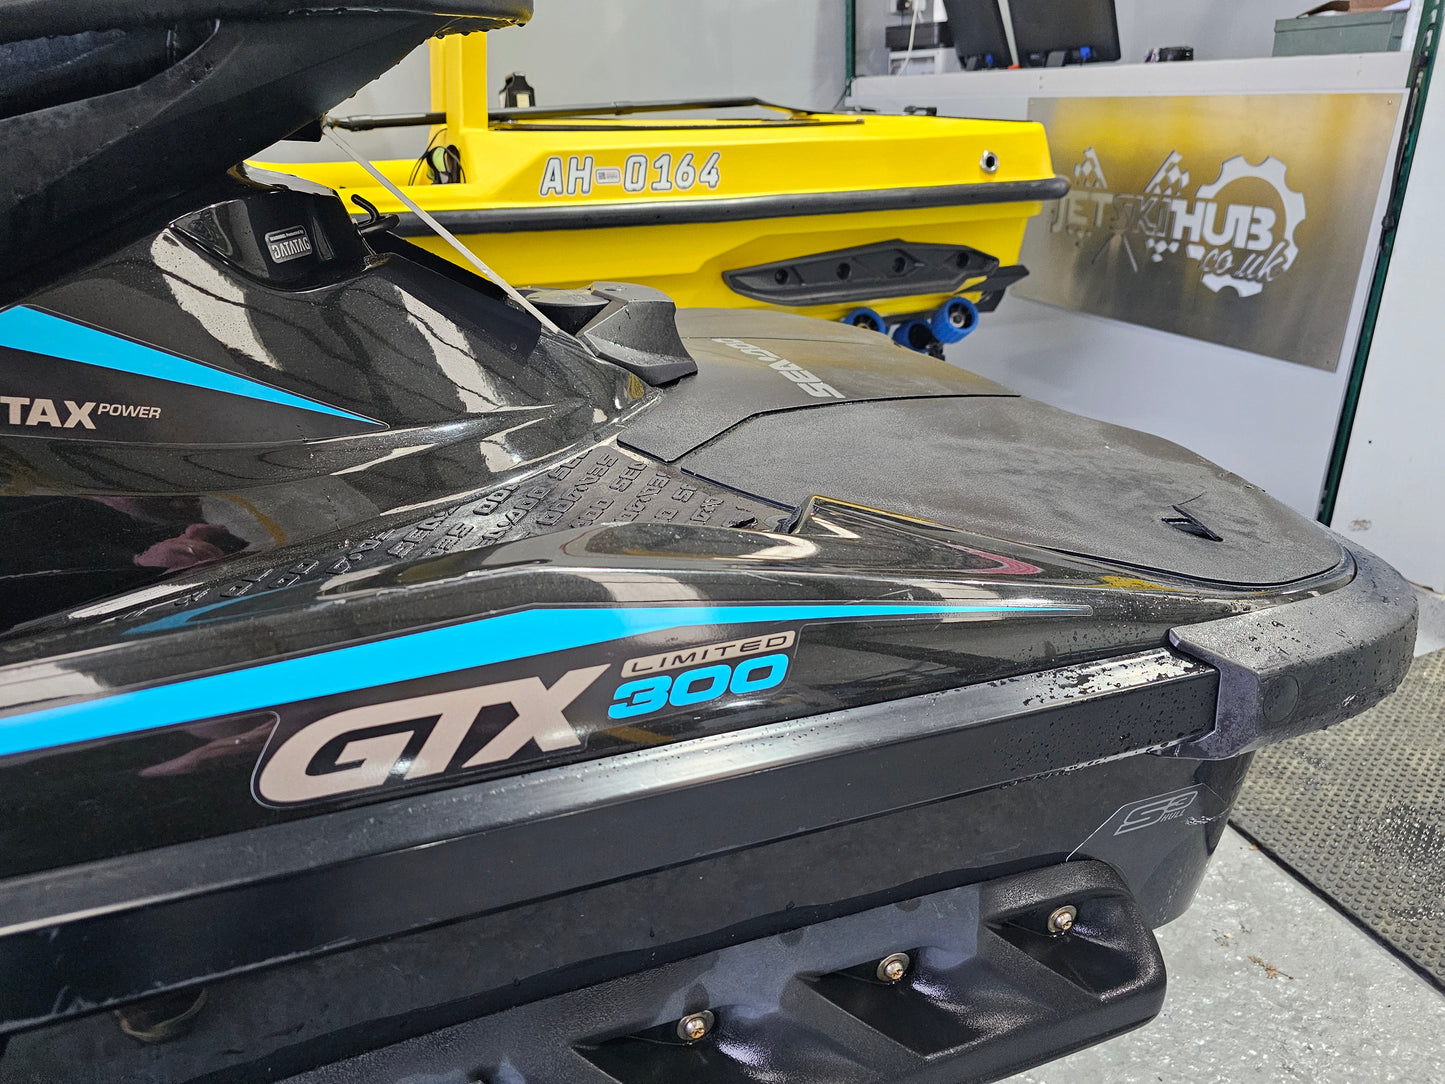 2017 Pre-owned Sea-Doo GTX Limited 300hp